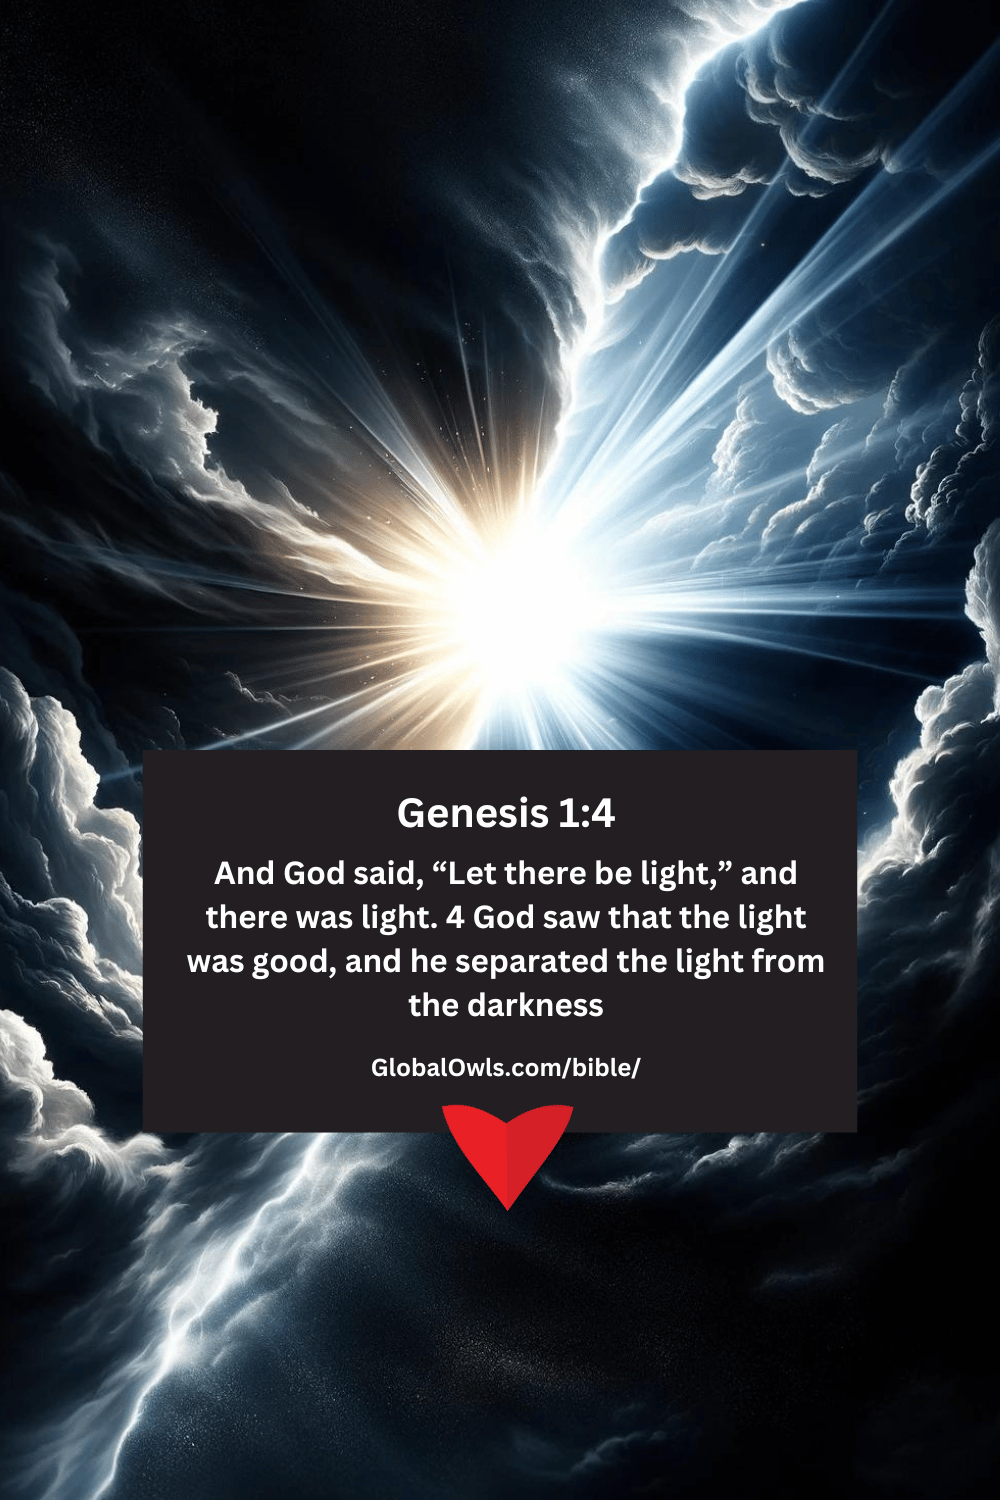 Genesis 1-4 And God said, “Let there be light,” and there was light. 4 God saw that the light was good, and he separated the light from the darkness